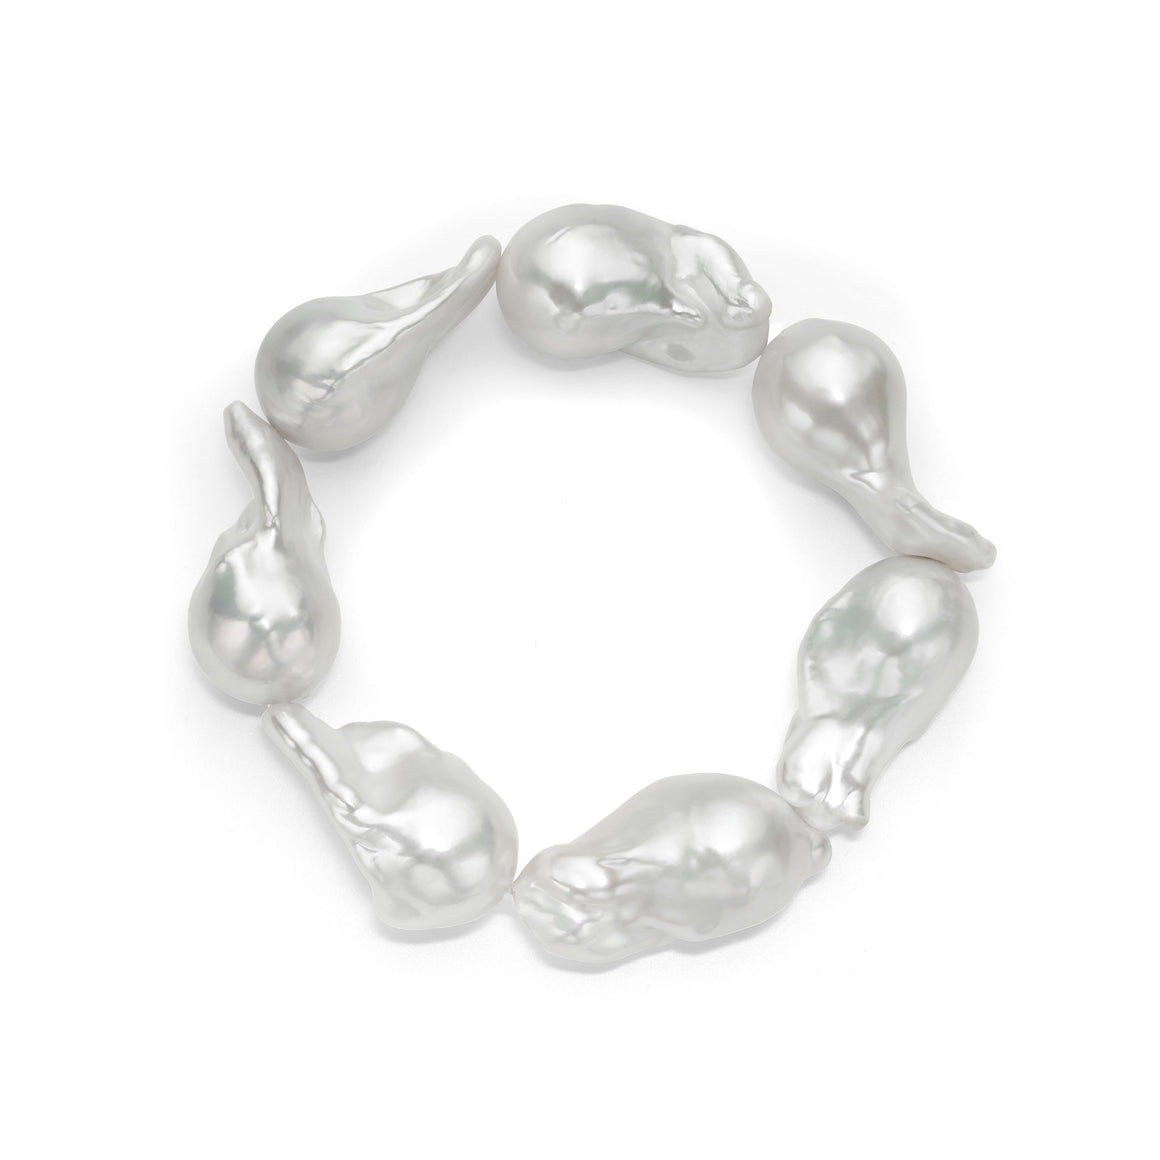 Le Croisette Large AAAA White Freshwater Baroque Pearl Stretch Bracelet